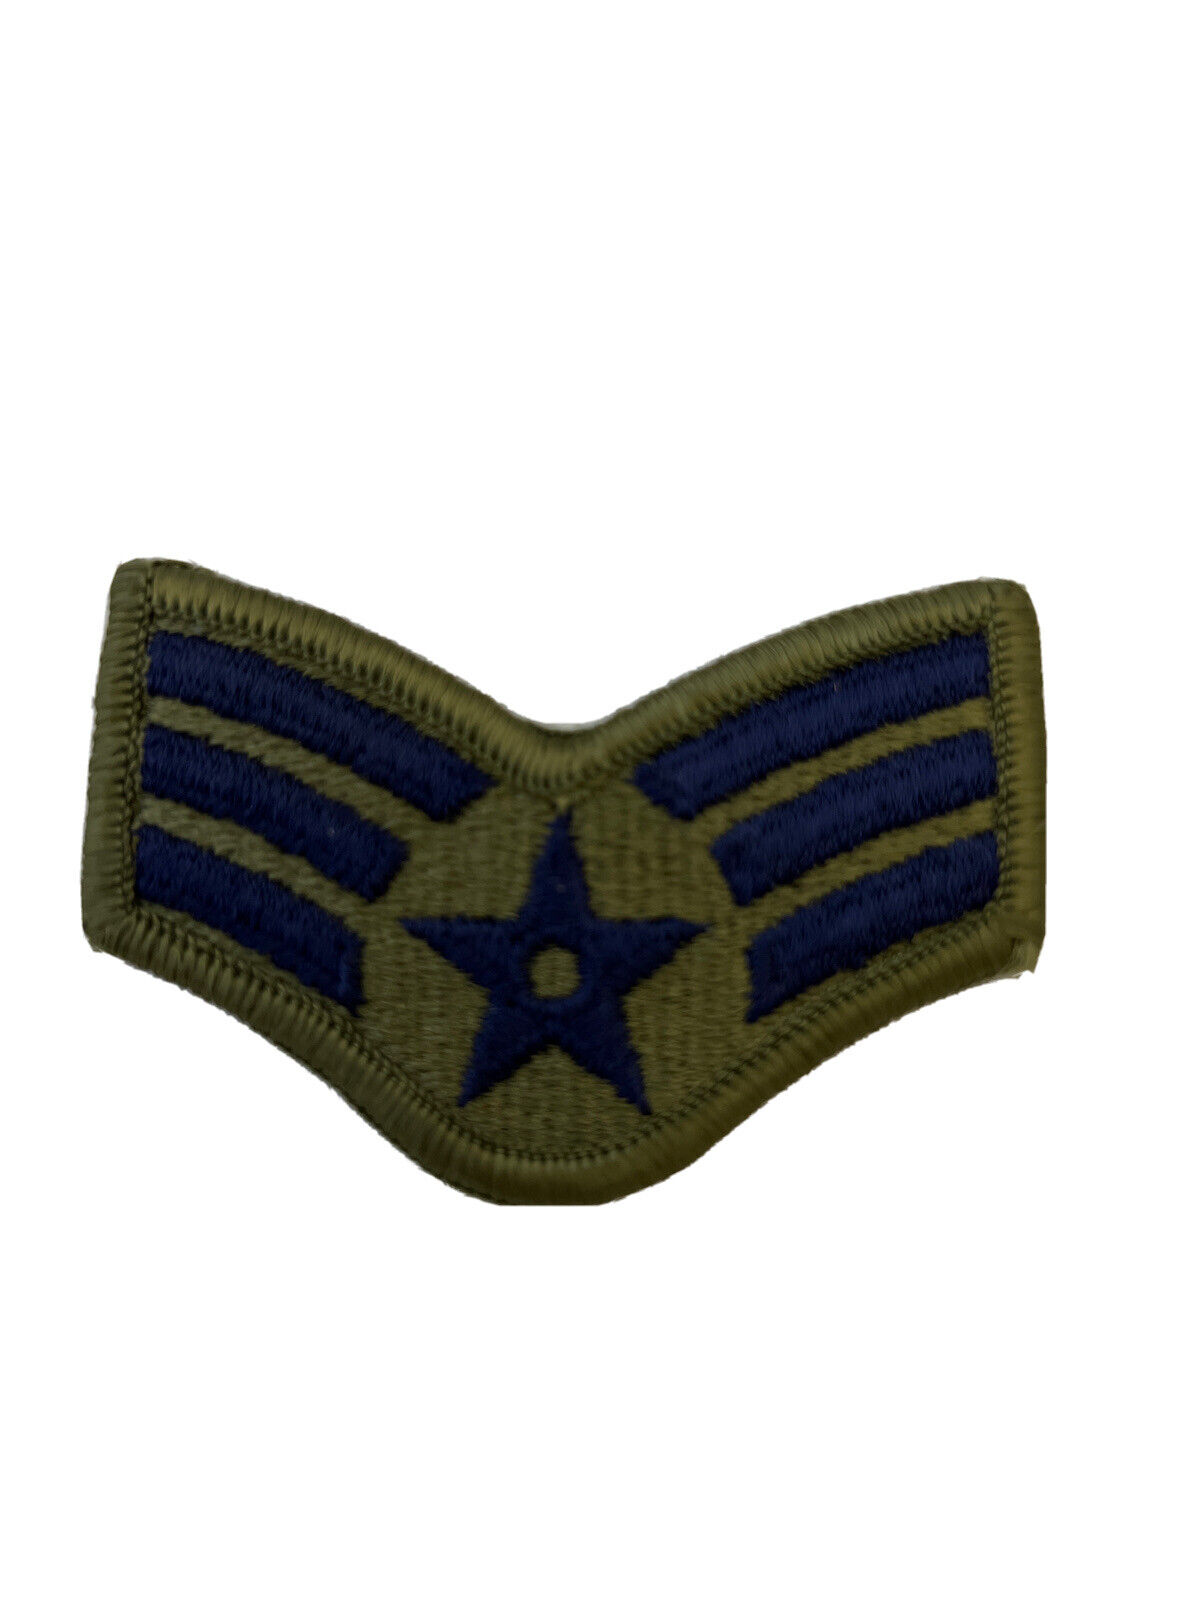 New Official USAF US Air Force Senior Airman E4 SrA Insignia Subdued